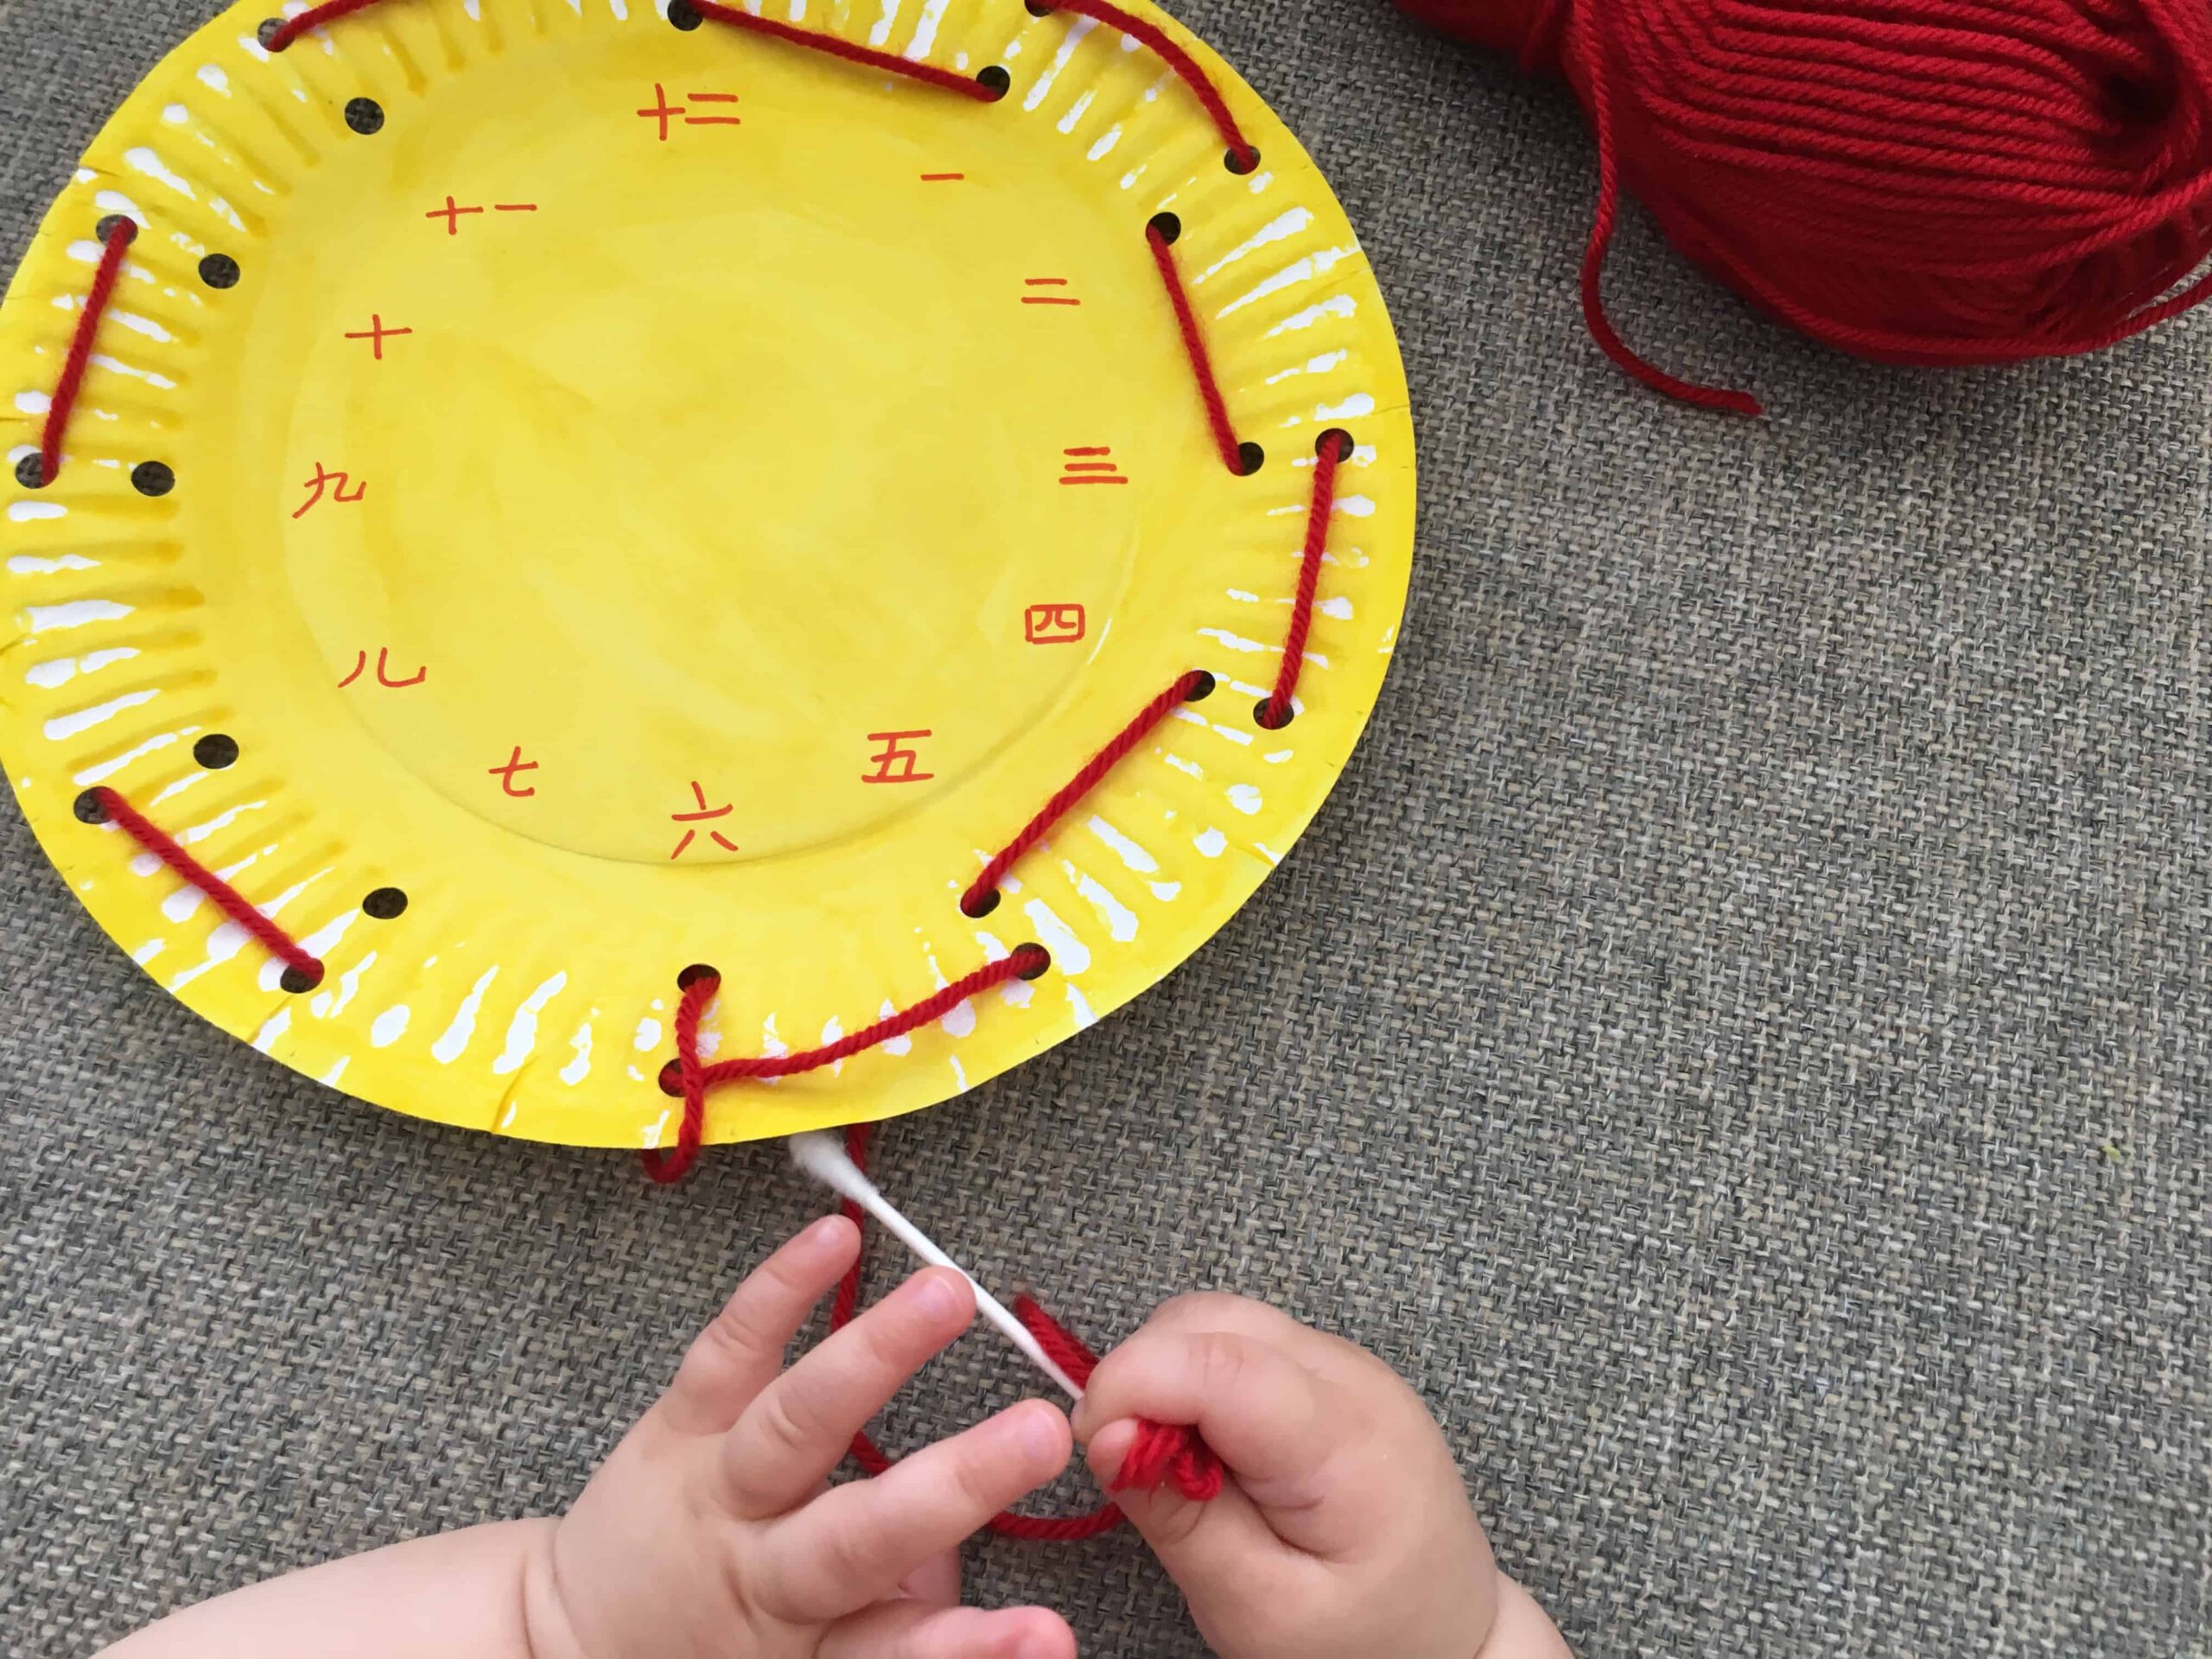 Paper Plate Clock Face Threading – A Fine Motor Numbers Activity for Kids!